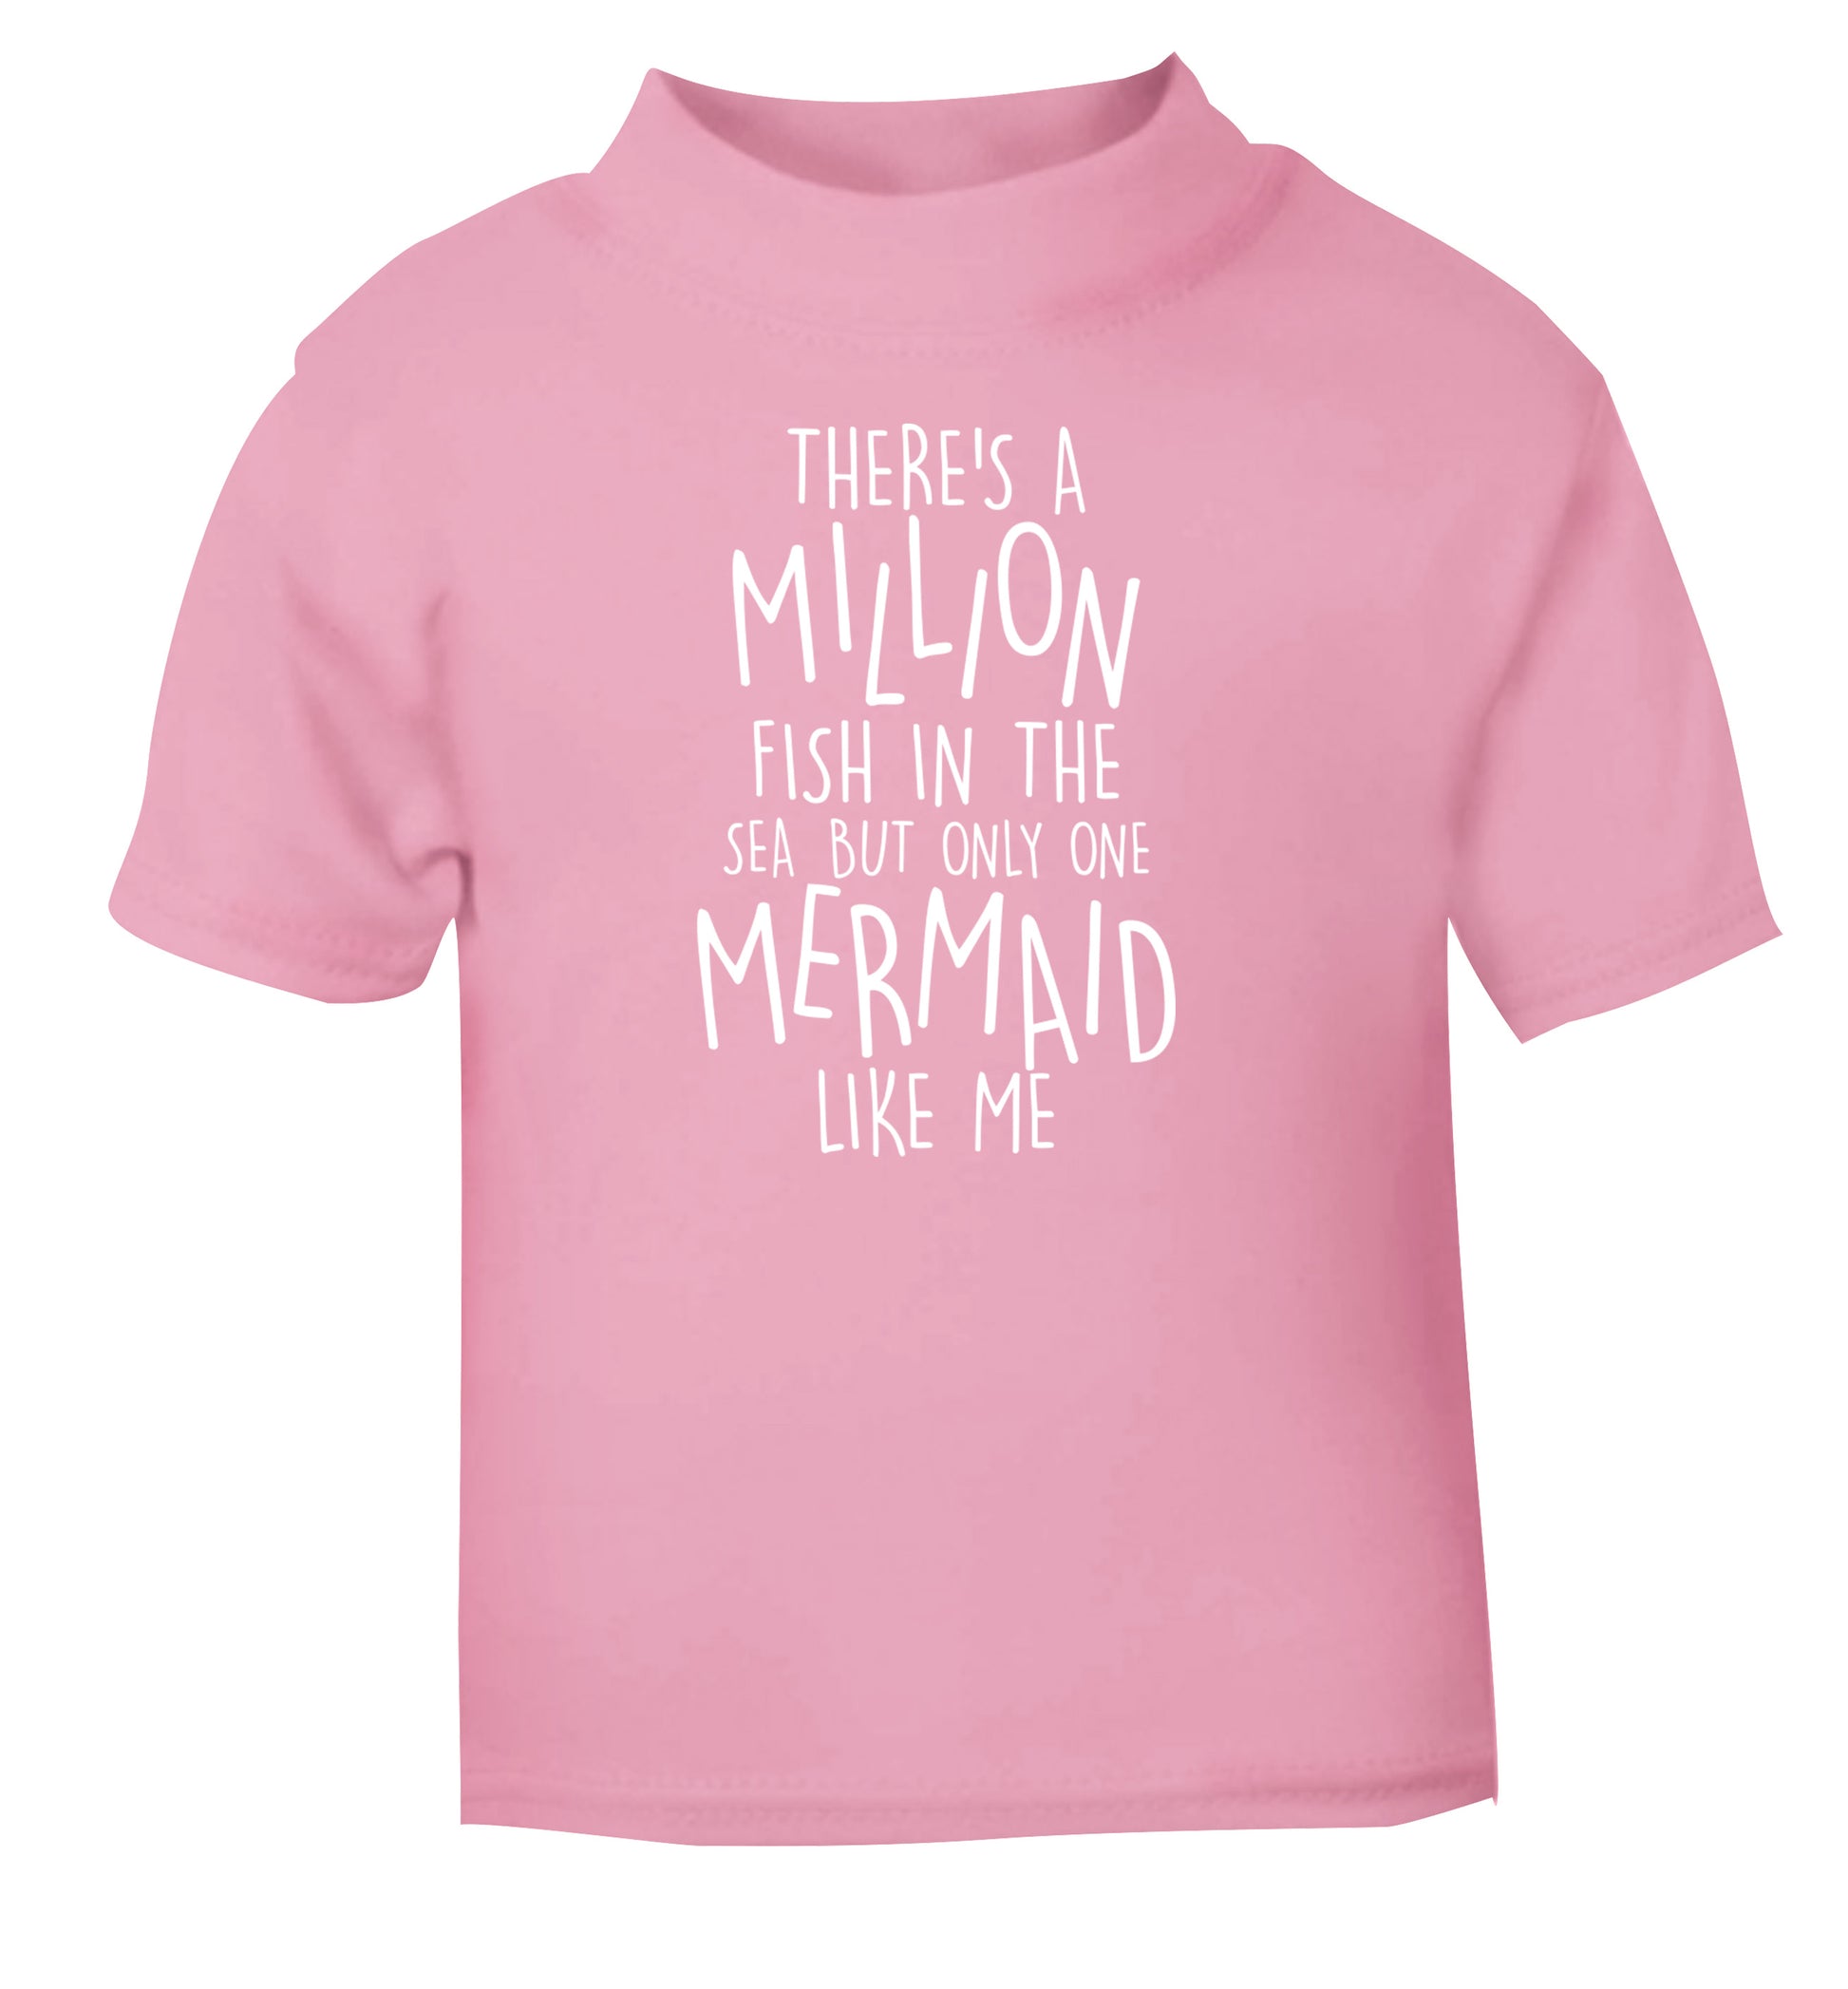 There's a million fish in the sea but only one mermaid like me light pink Baby Toddler Tshirt 2 Years